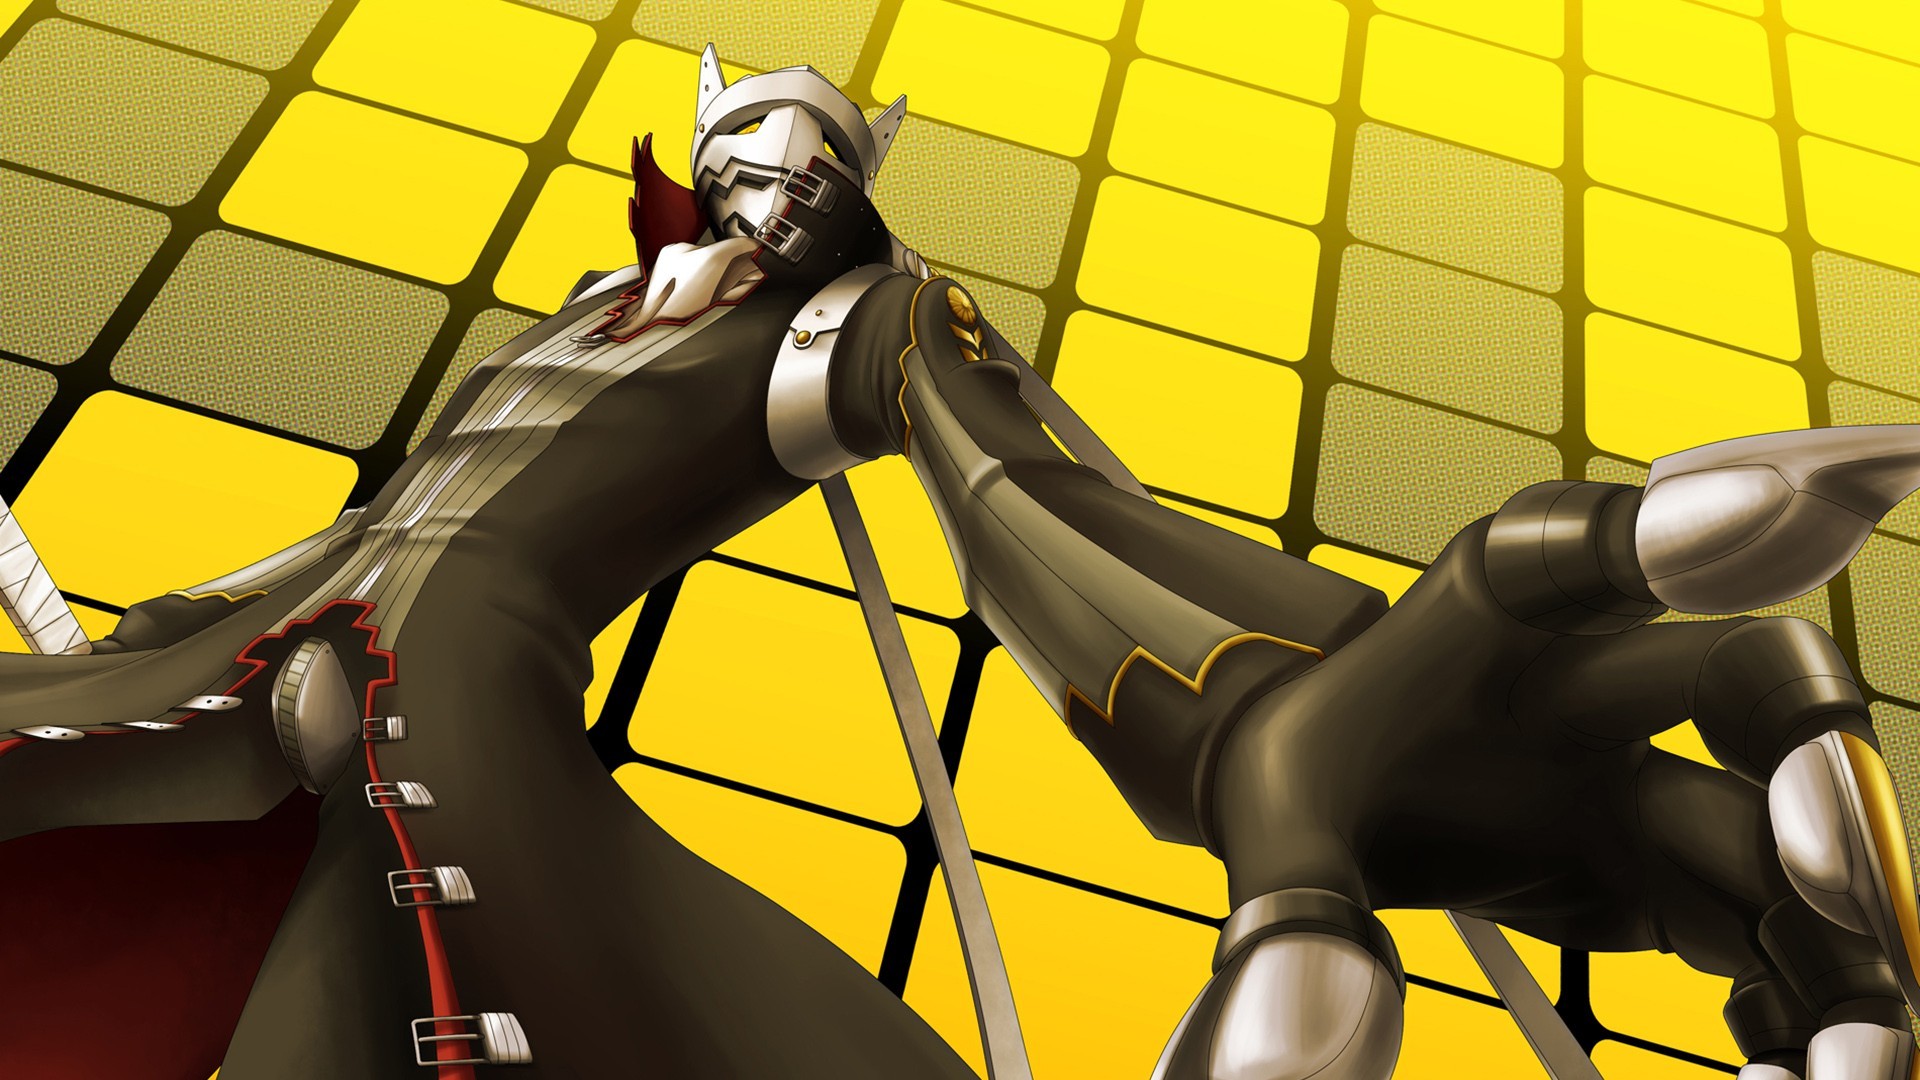 Anime 1920x1080 Persona series Persona 4 yellow background atlus video games video game art